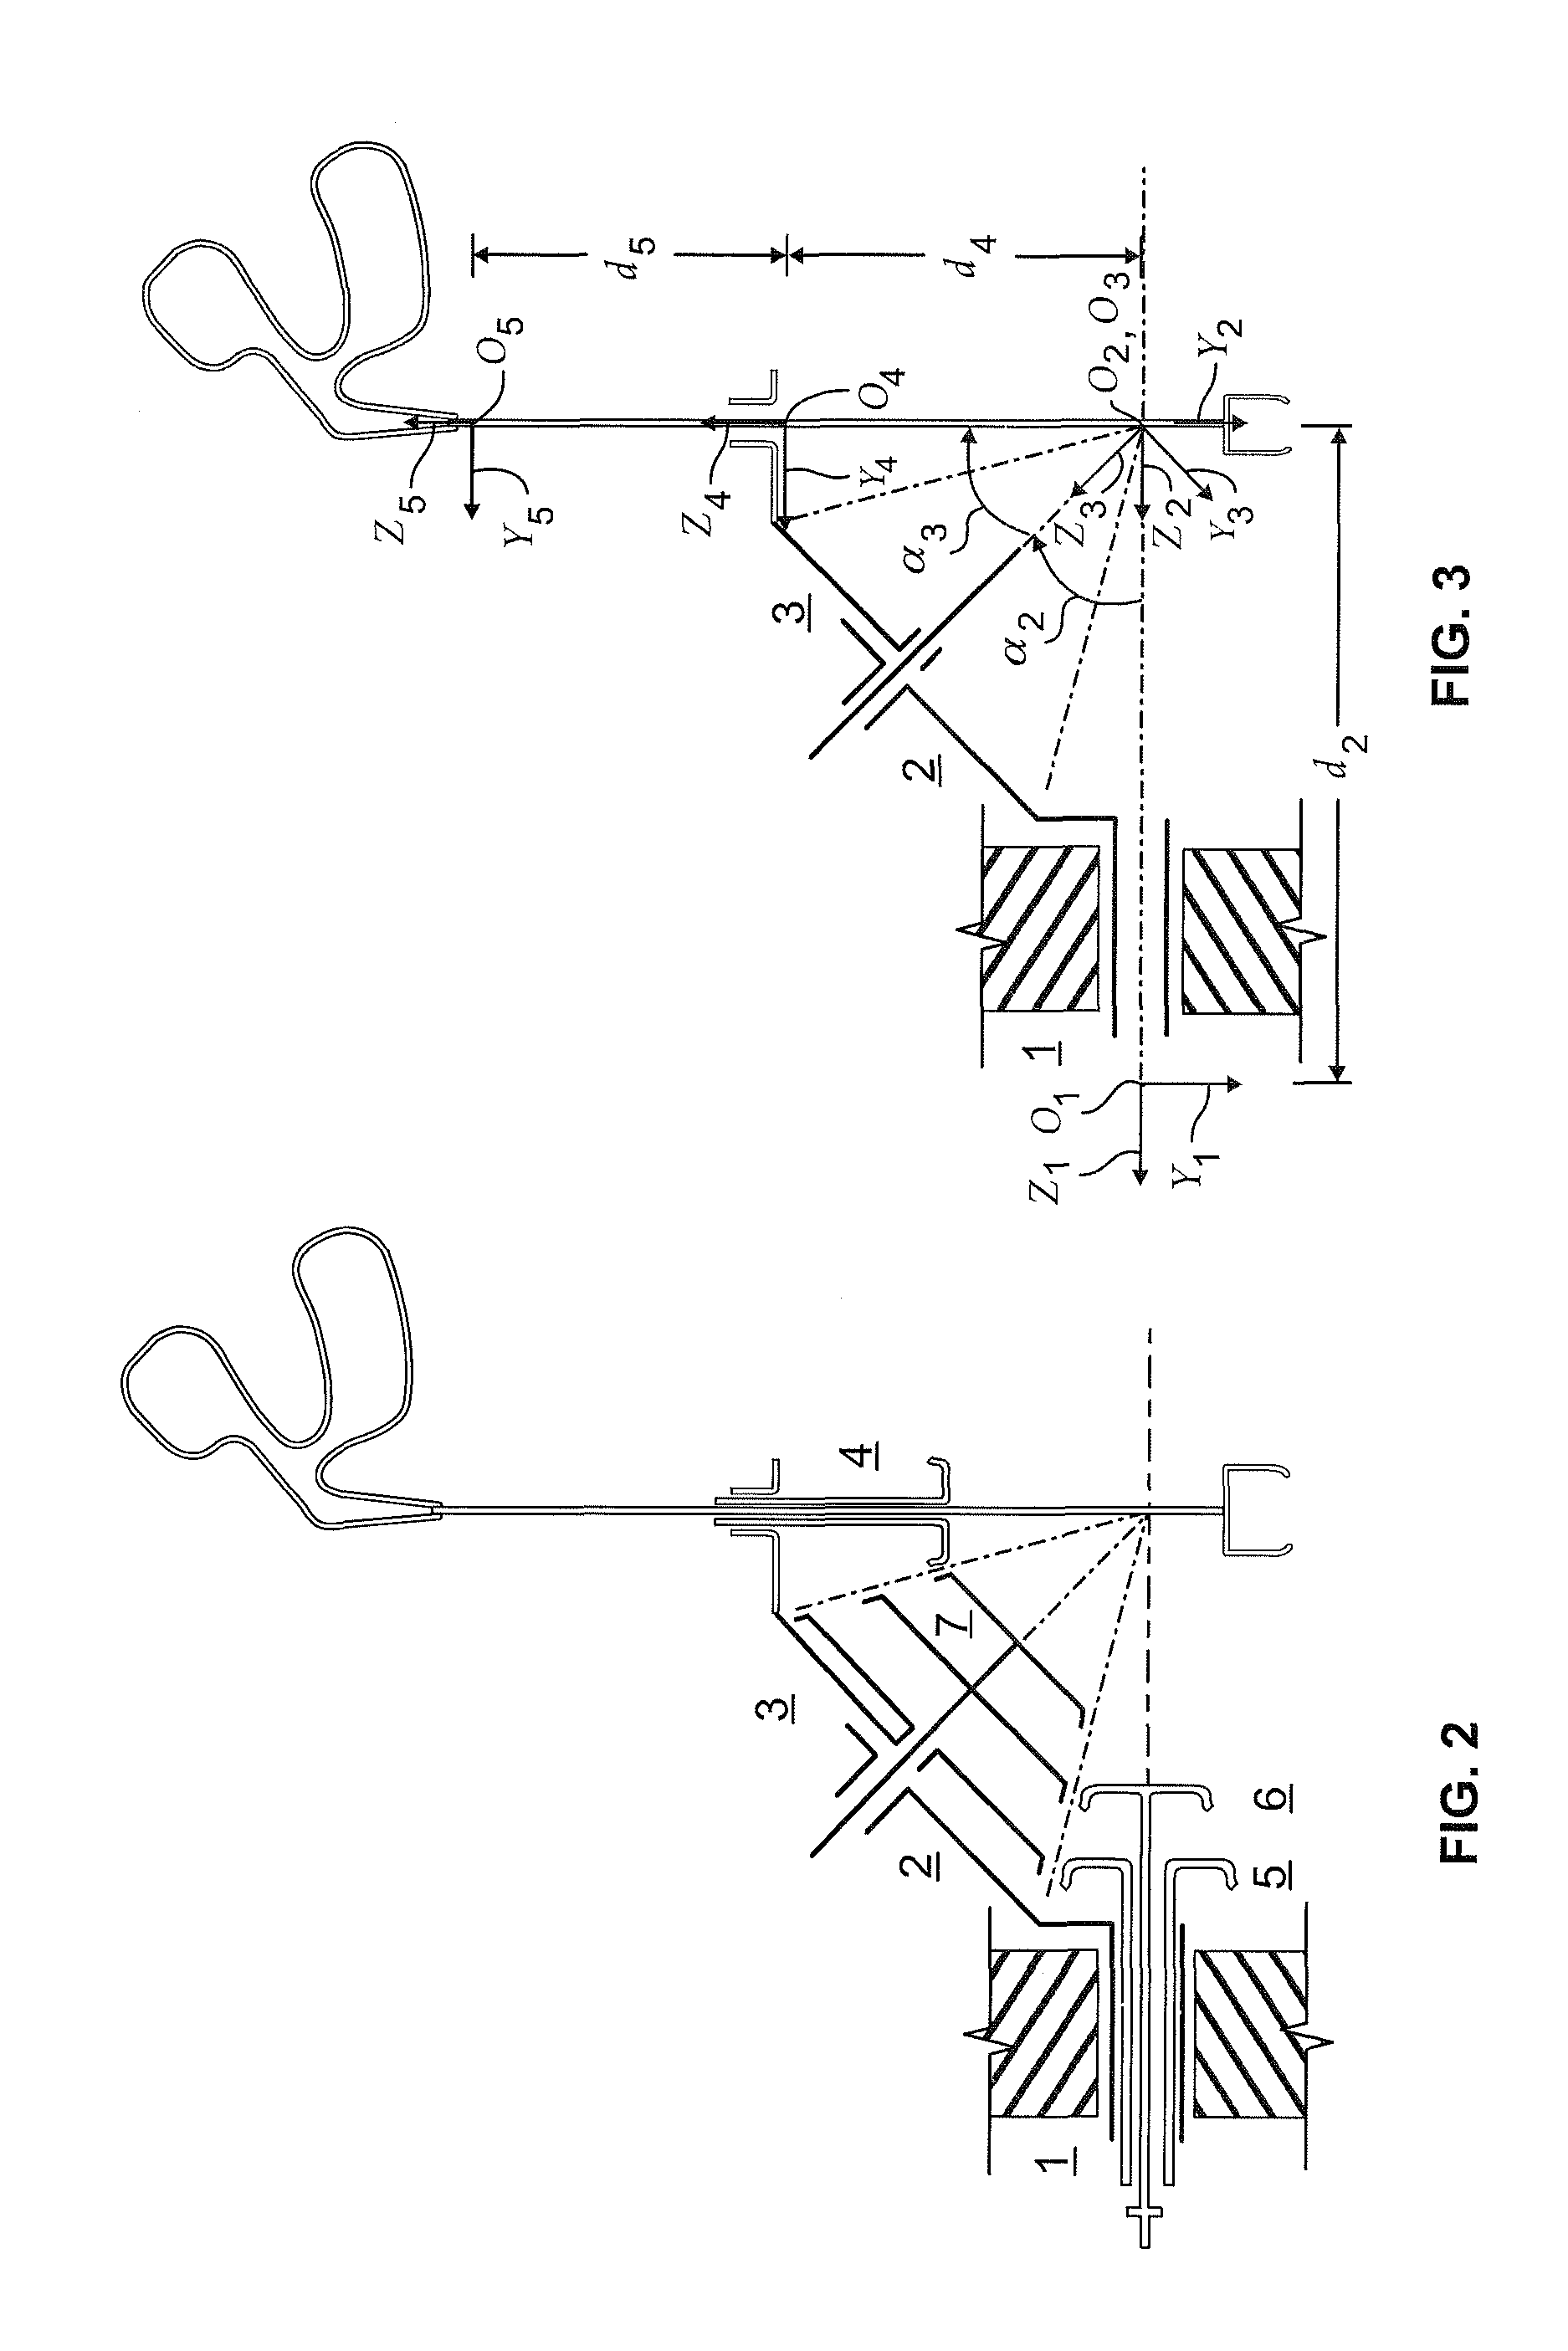 System and methods for controlling surgical tool elements